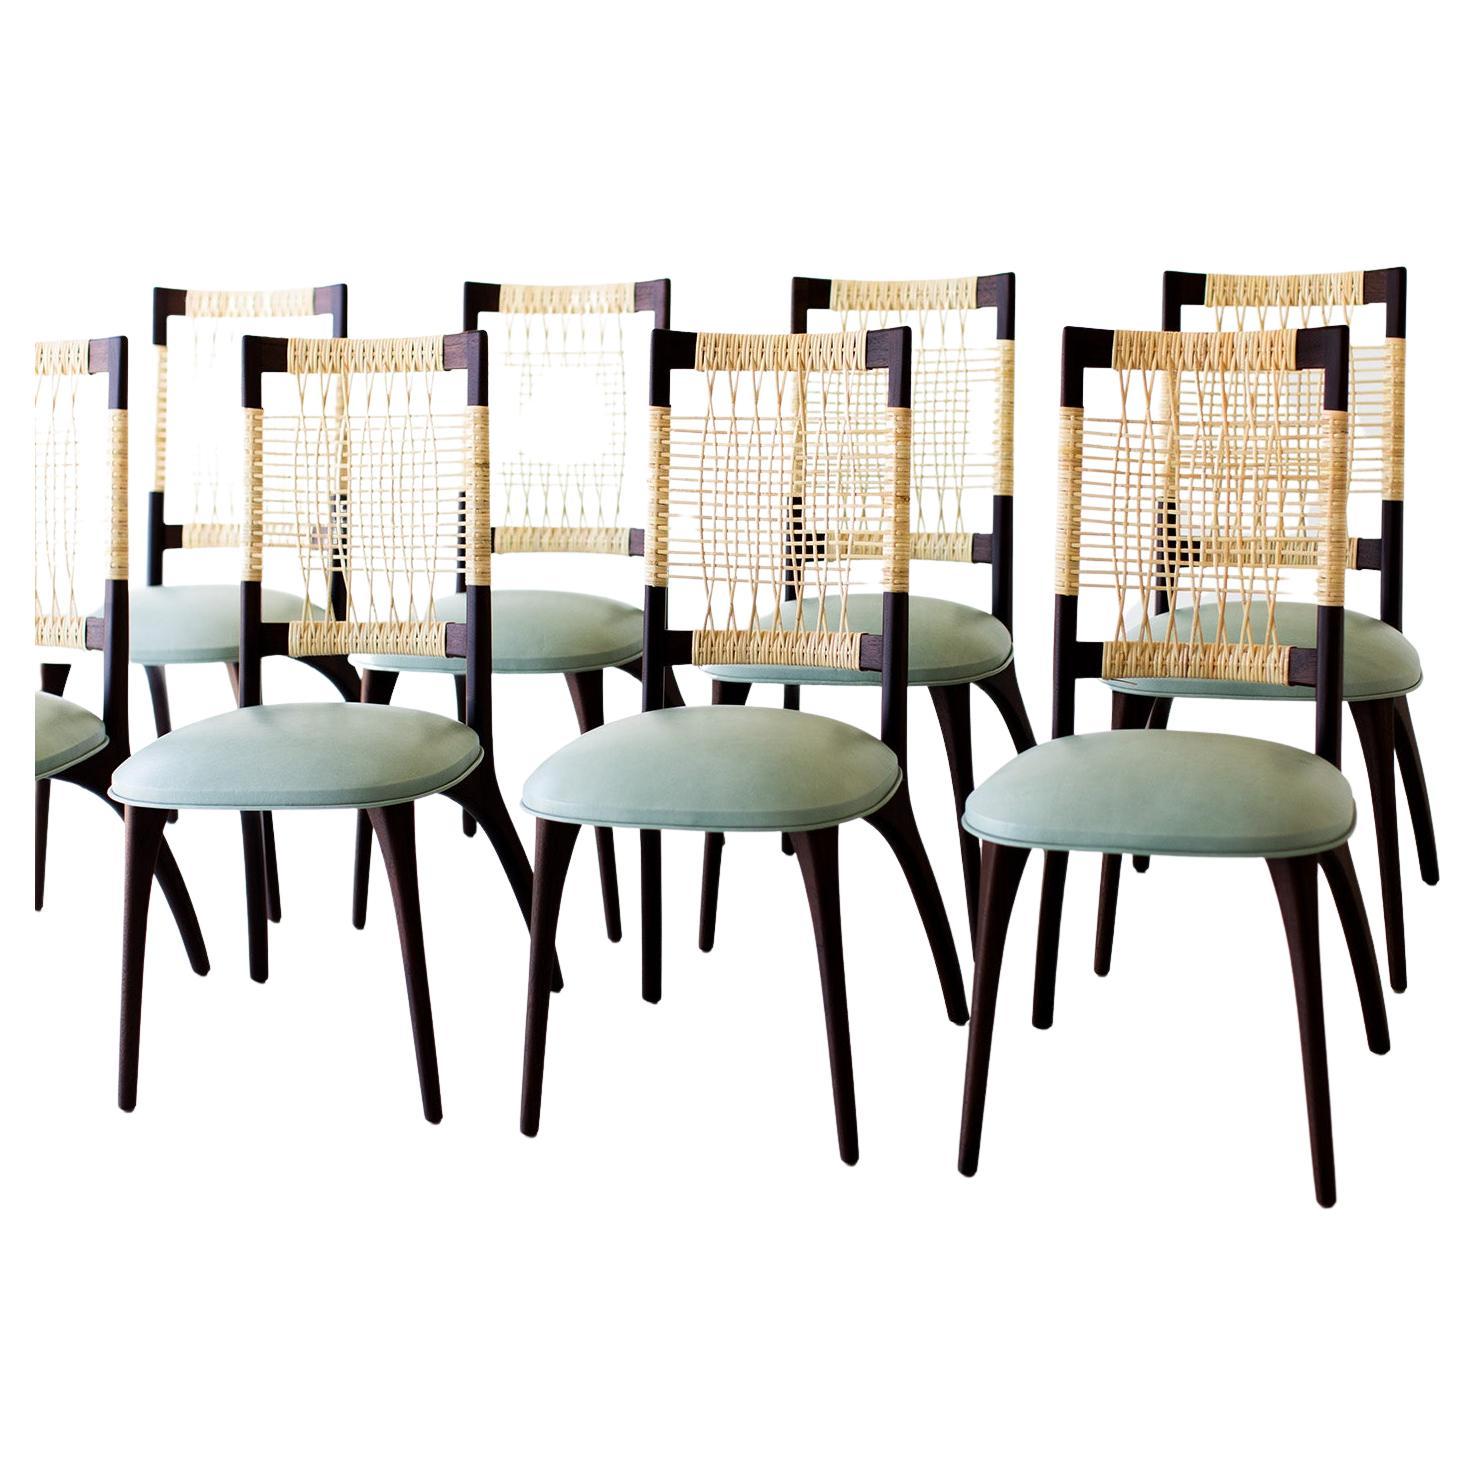 Craft Caned Dining Chairs, Bonnie Caned Dining Chairs, Leather and Walnut